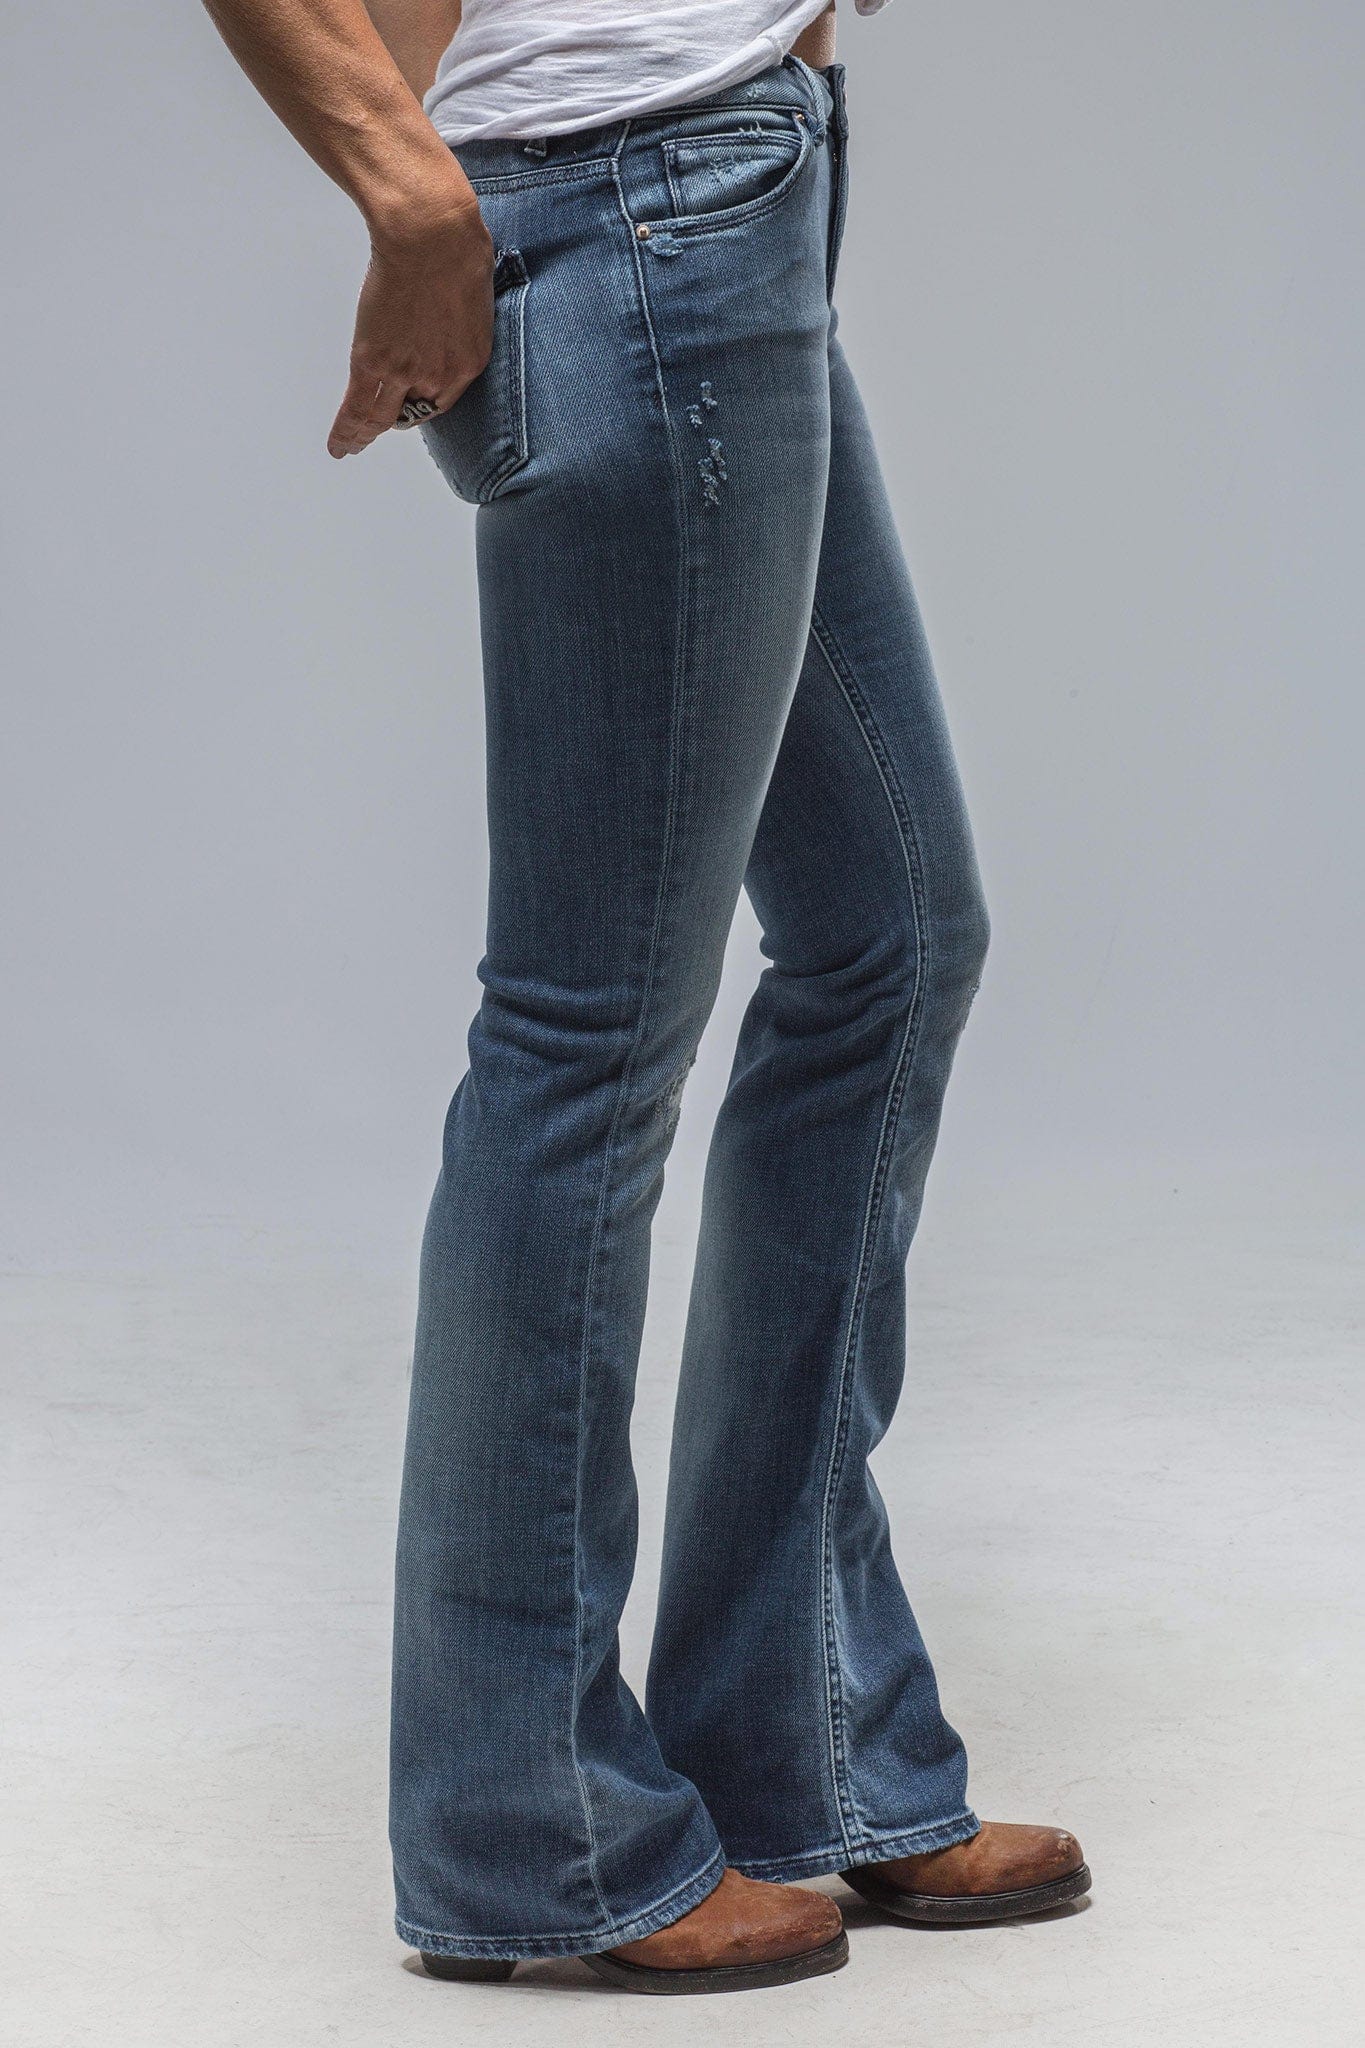 Women's Low-Rise Jeans Sexy Stylish Flare Bell Bottom Slim Bootcut